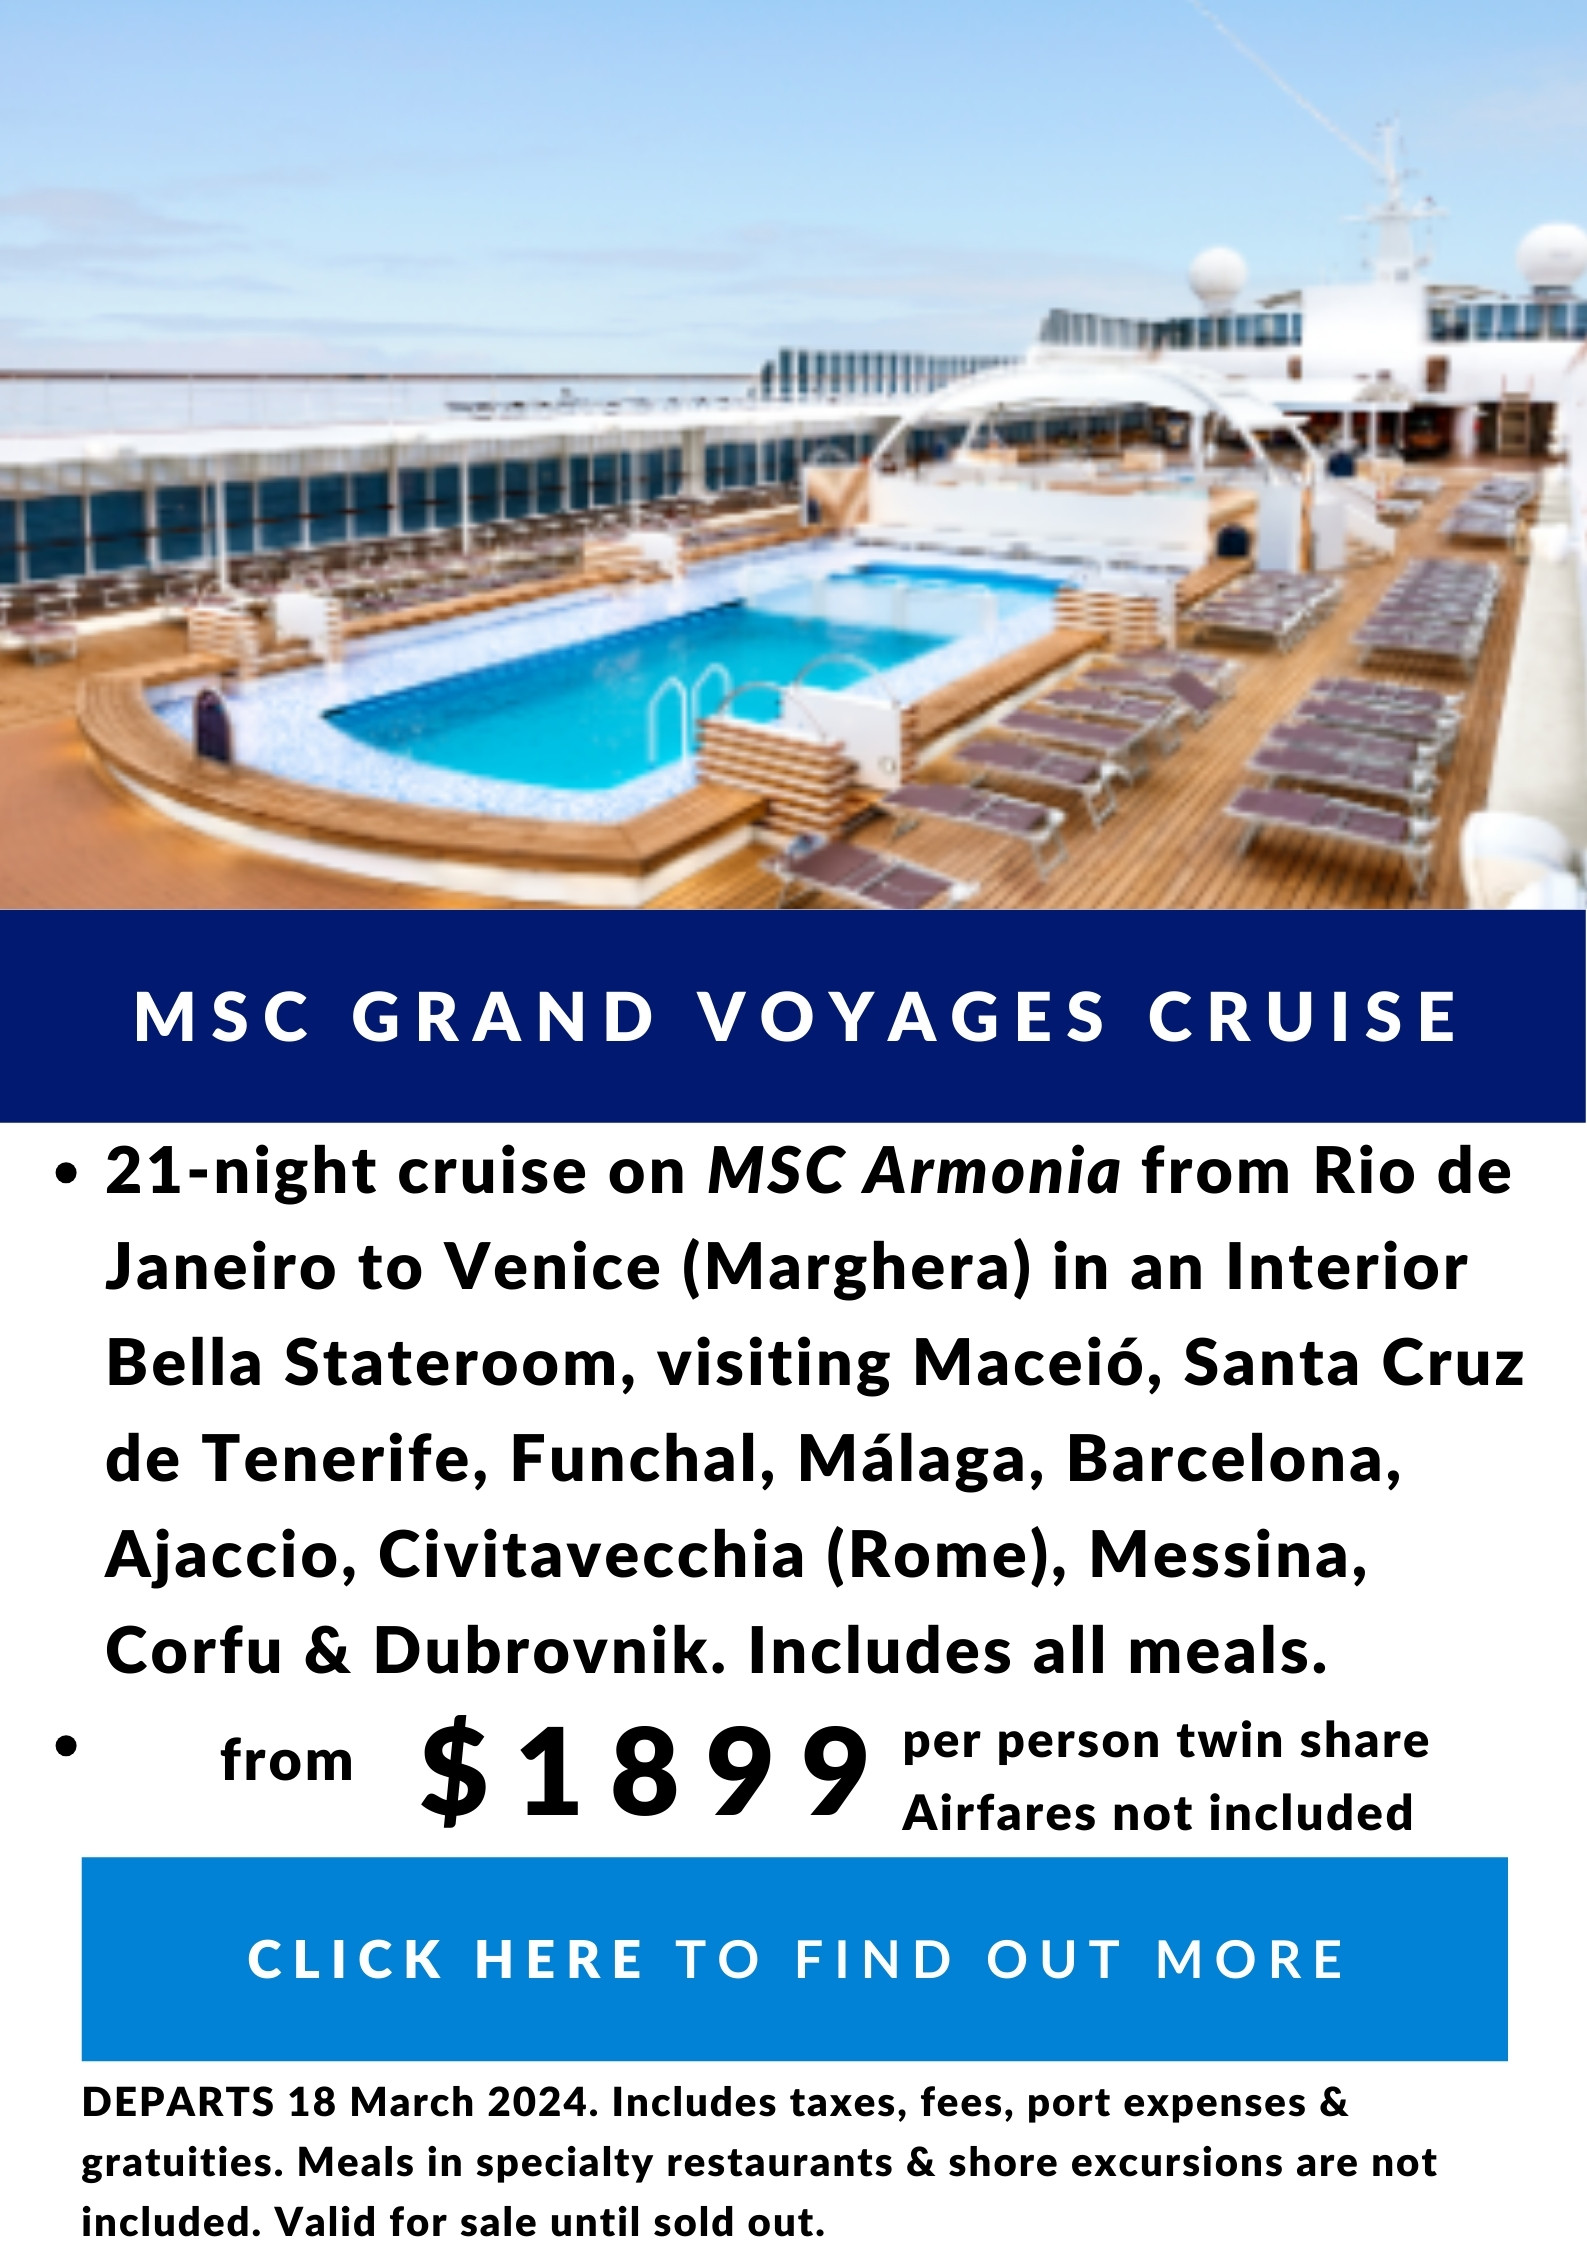 From $1899 per person twin share